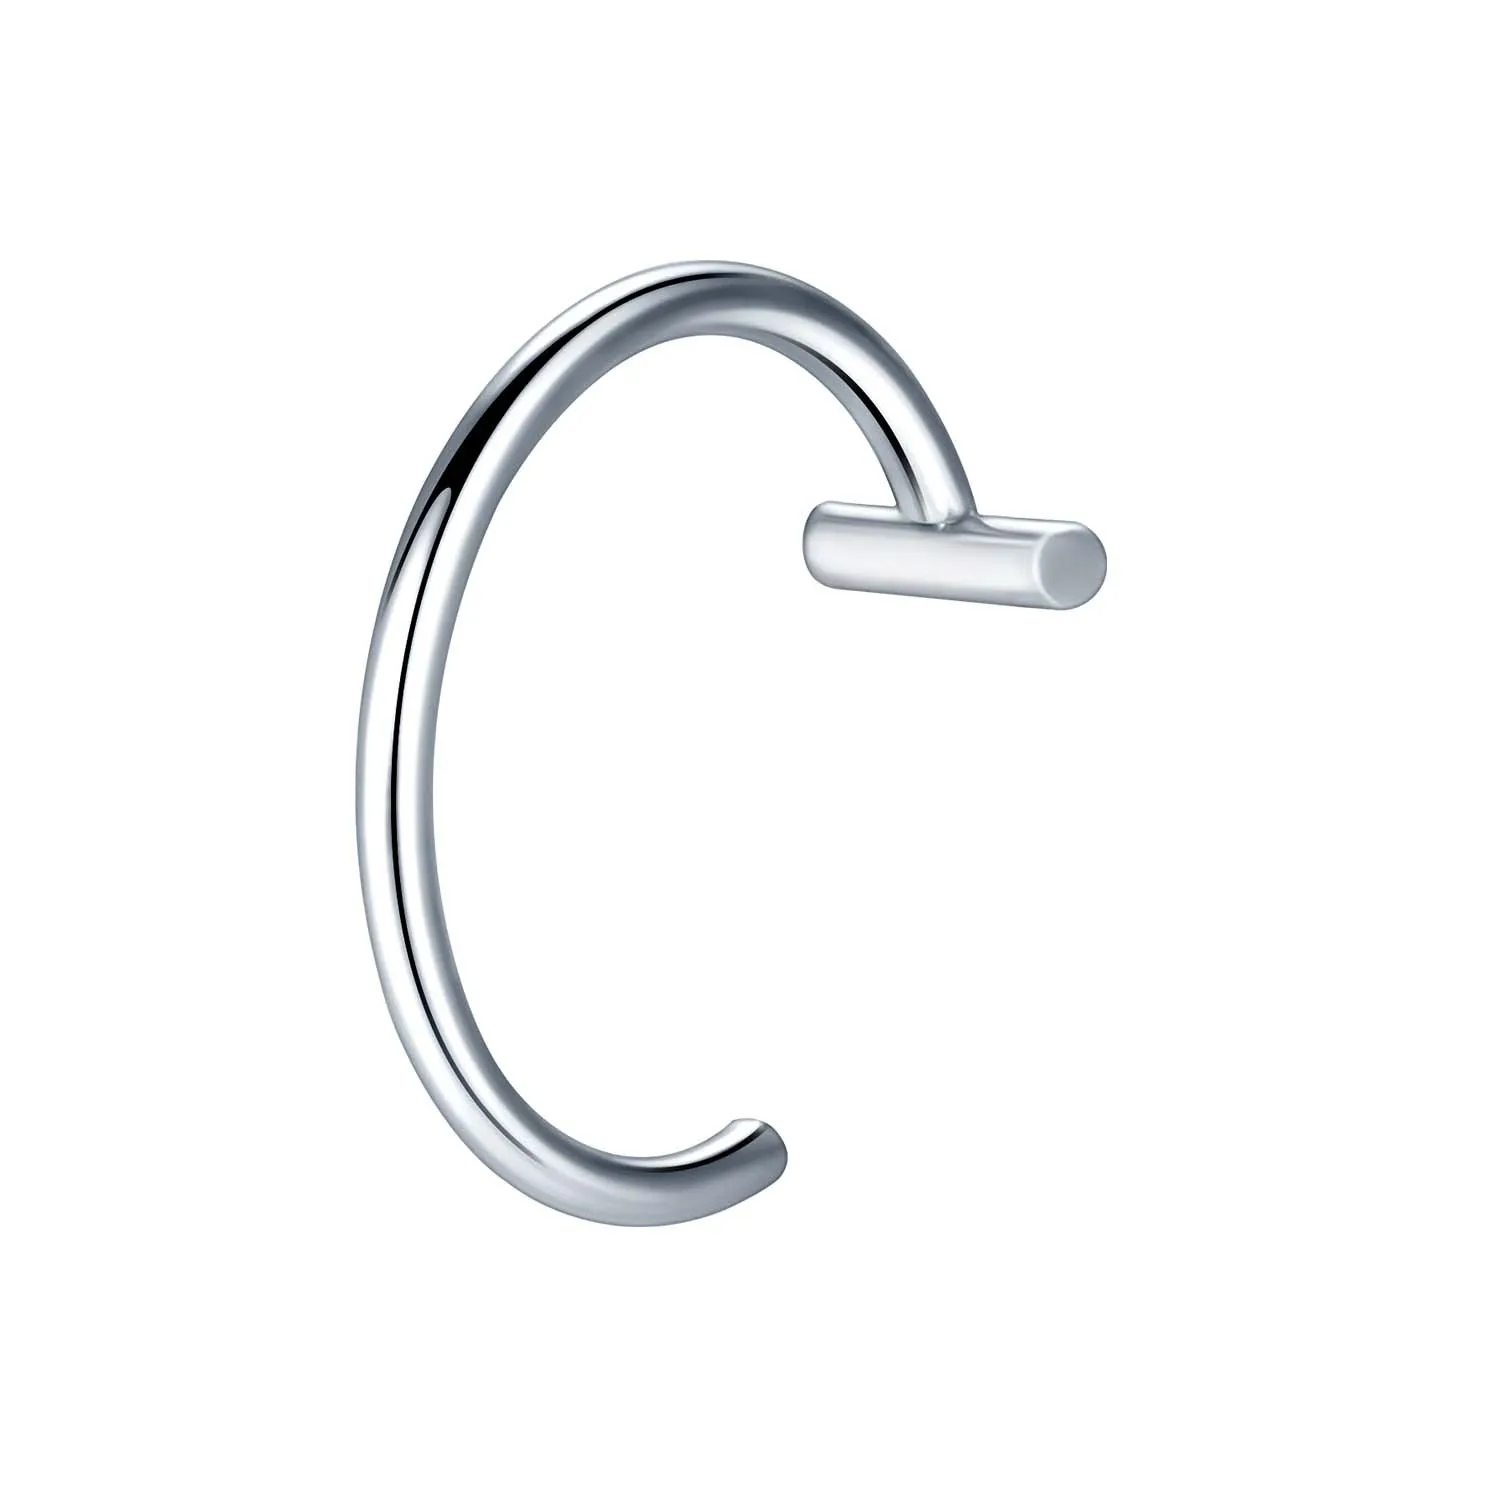 Nose Rings Studs Fashion Stainless Steel Horseshoe Fake Ring C Clip Lip Piercing Stud Hoop For Women Men Barbell Drop Delivery Je J Dh4Ev